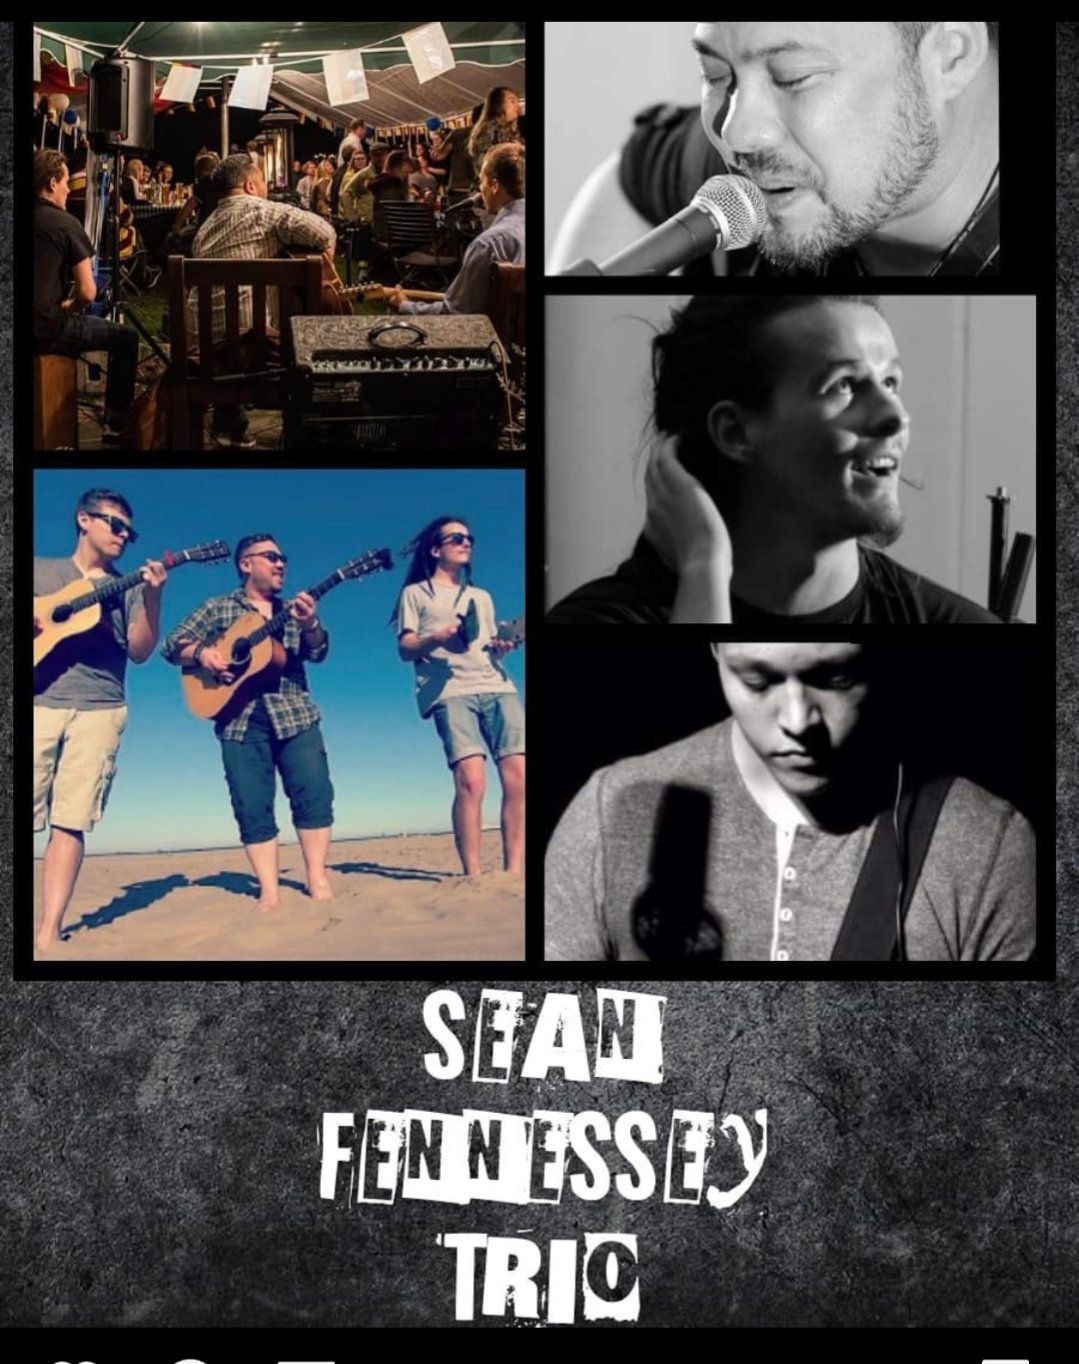 THE Sean Fennessey Trio: May Day